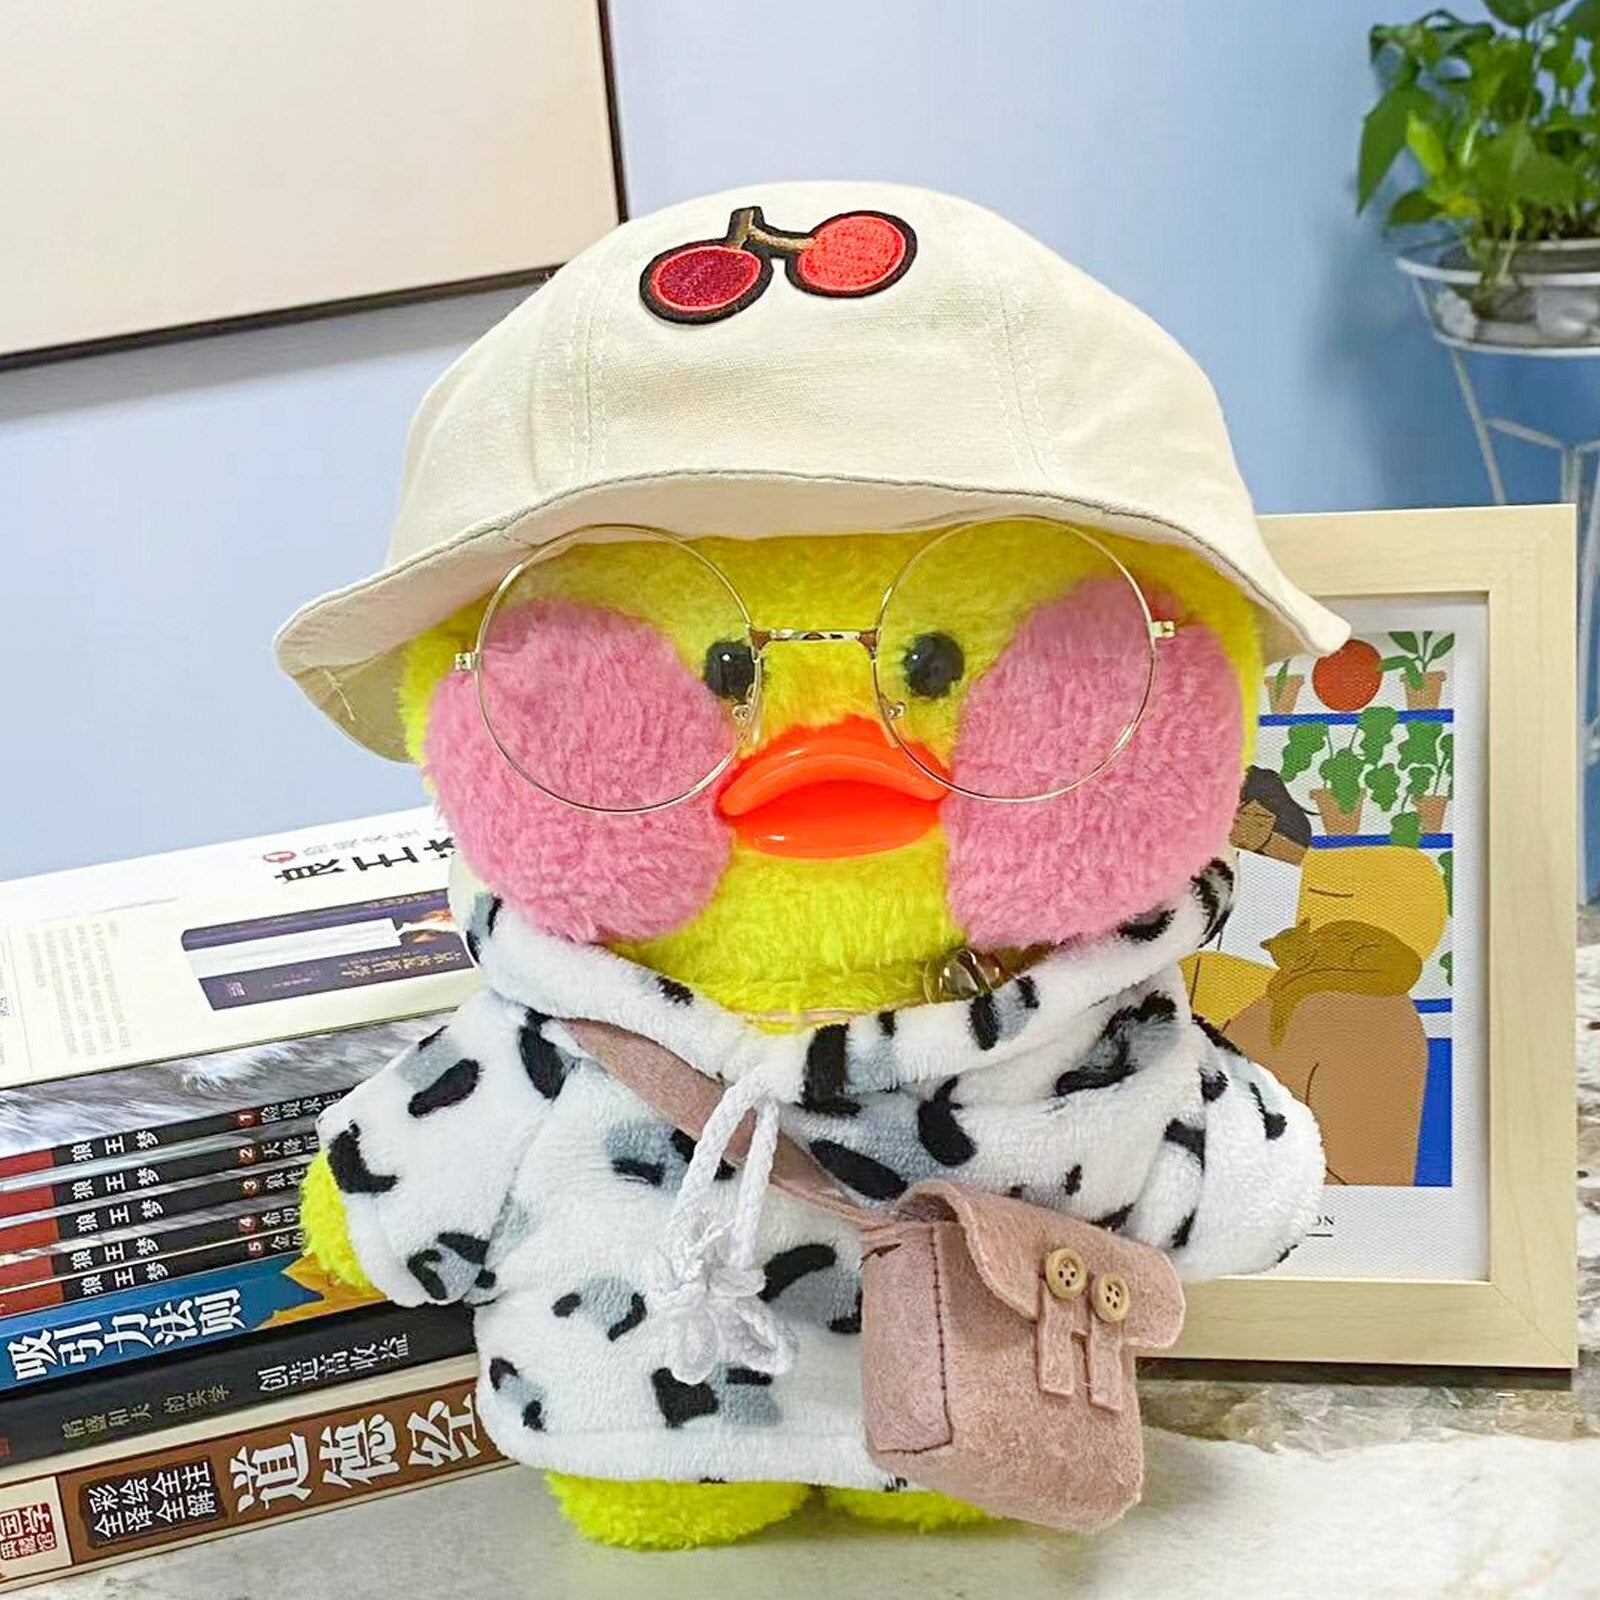 Cute Duck Plush with Flower Hat and Backpack - Soft Toy for Kids